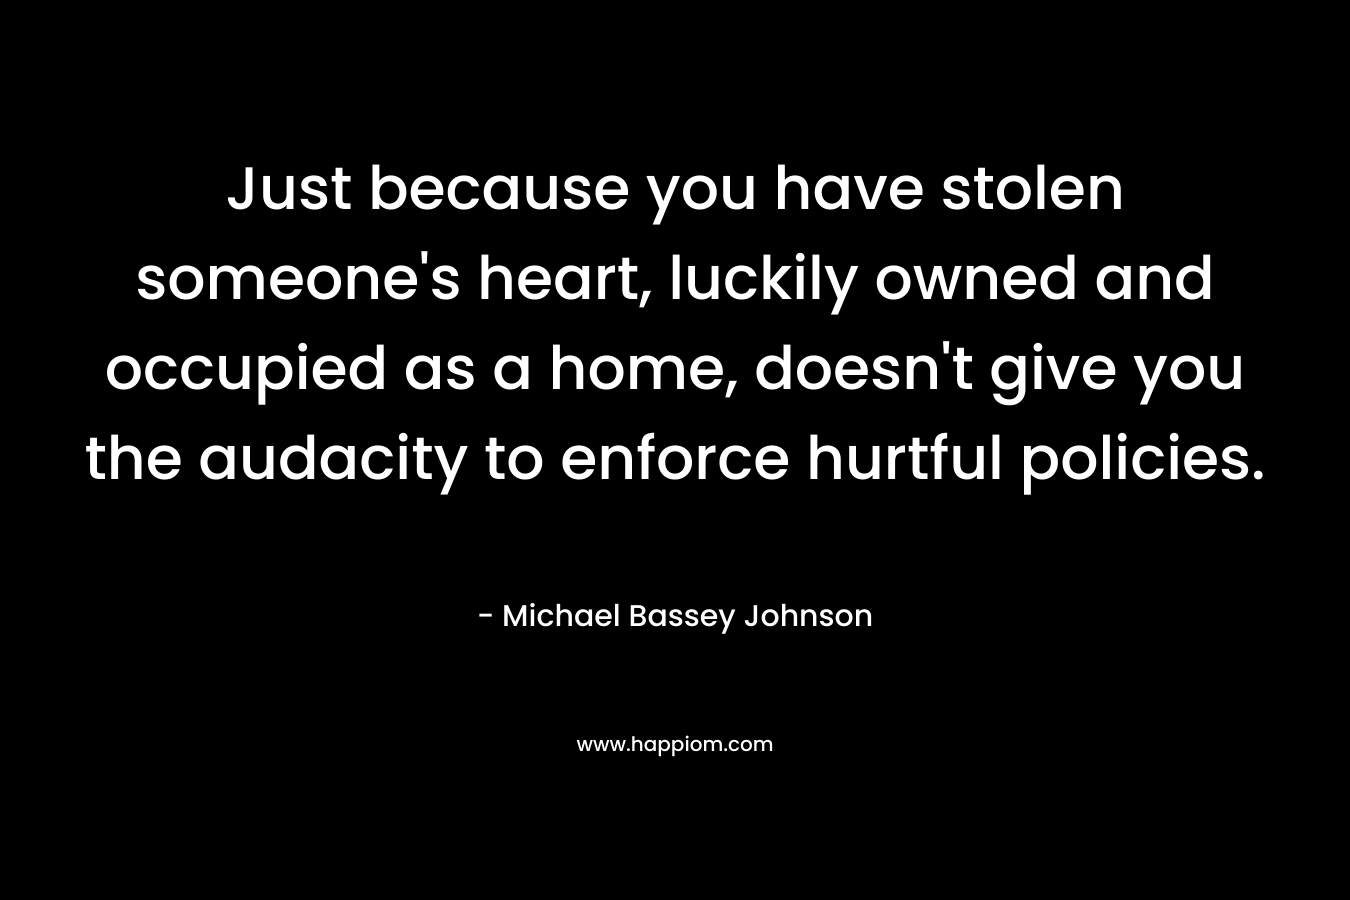 Just because you have stolen someone’s heart, luckily owned and occupied as a home, doesn’t give you the audacity to enforce hurtful policies. – Michael Bassey Johnson